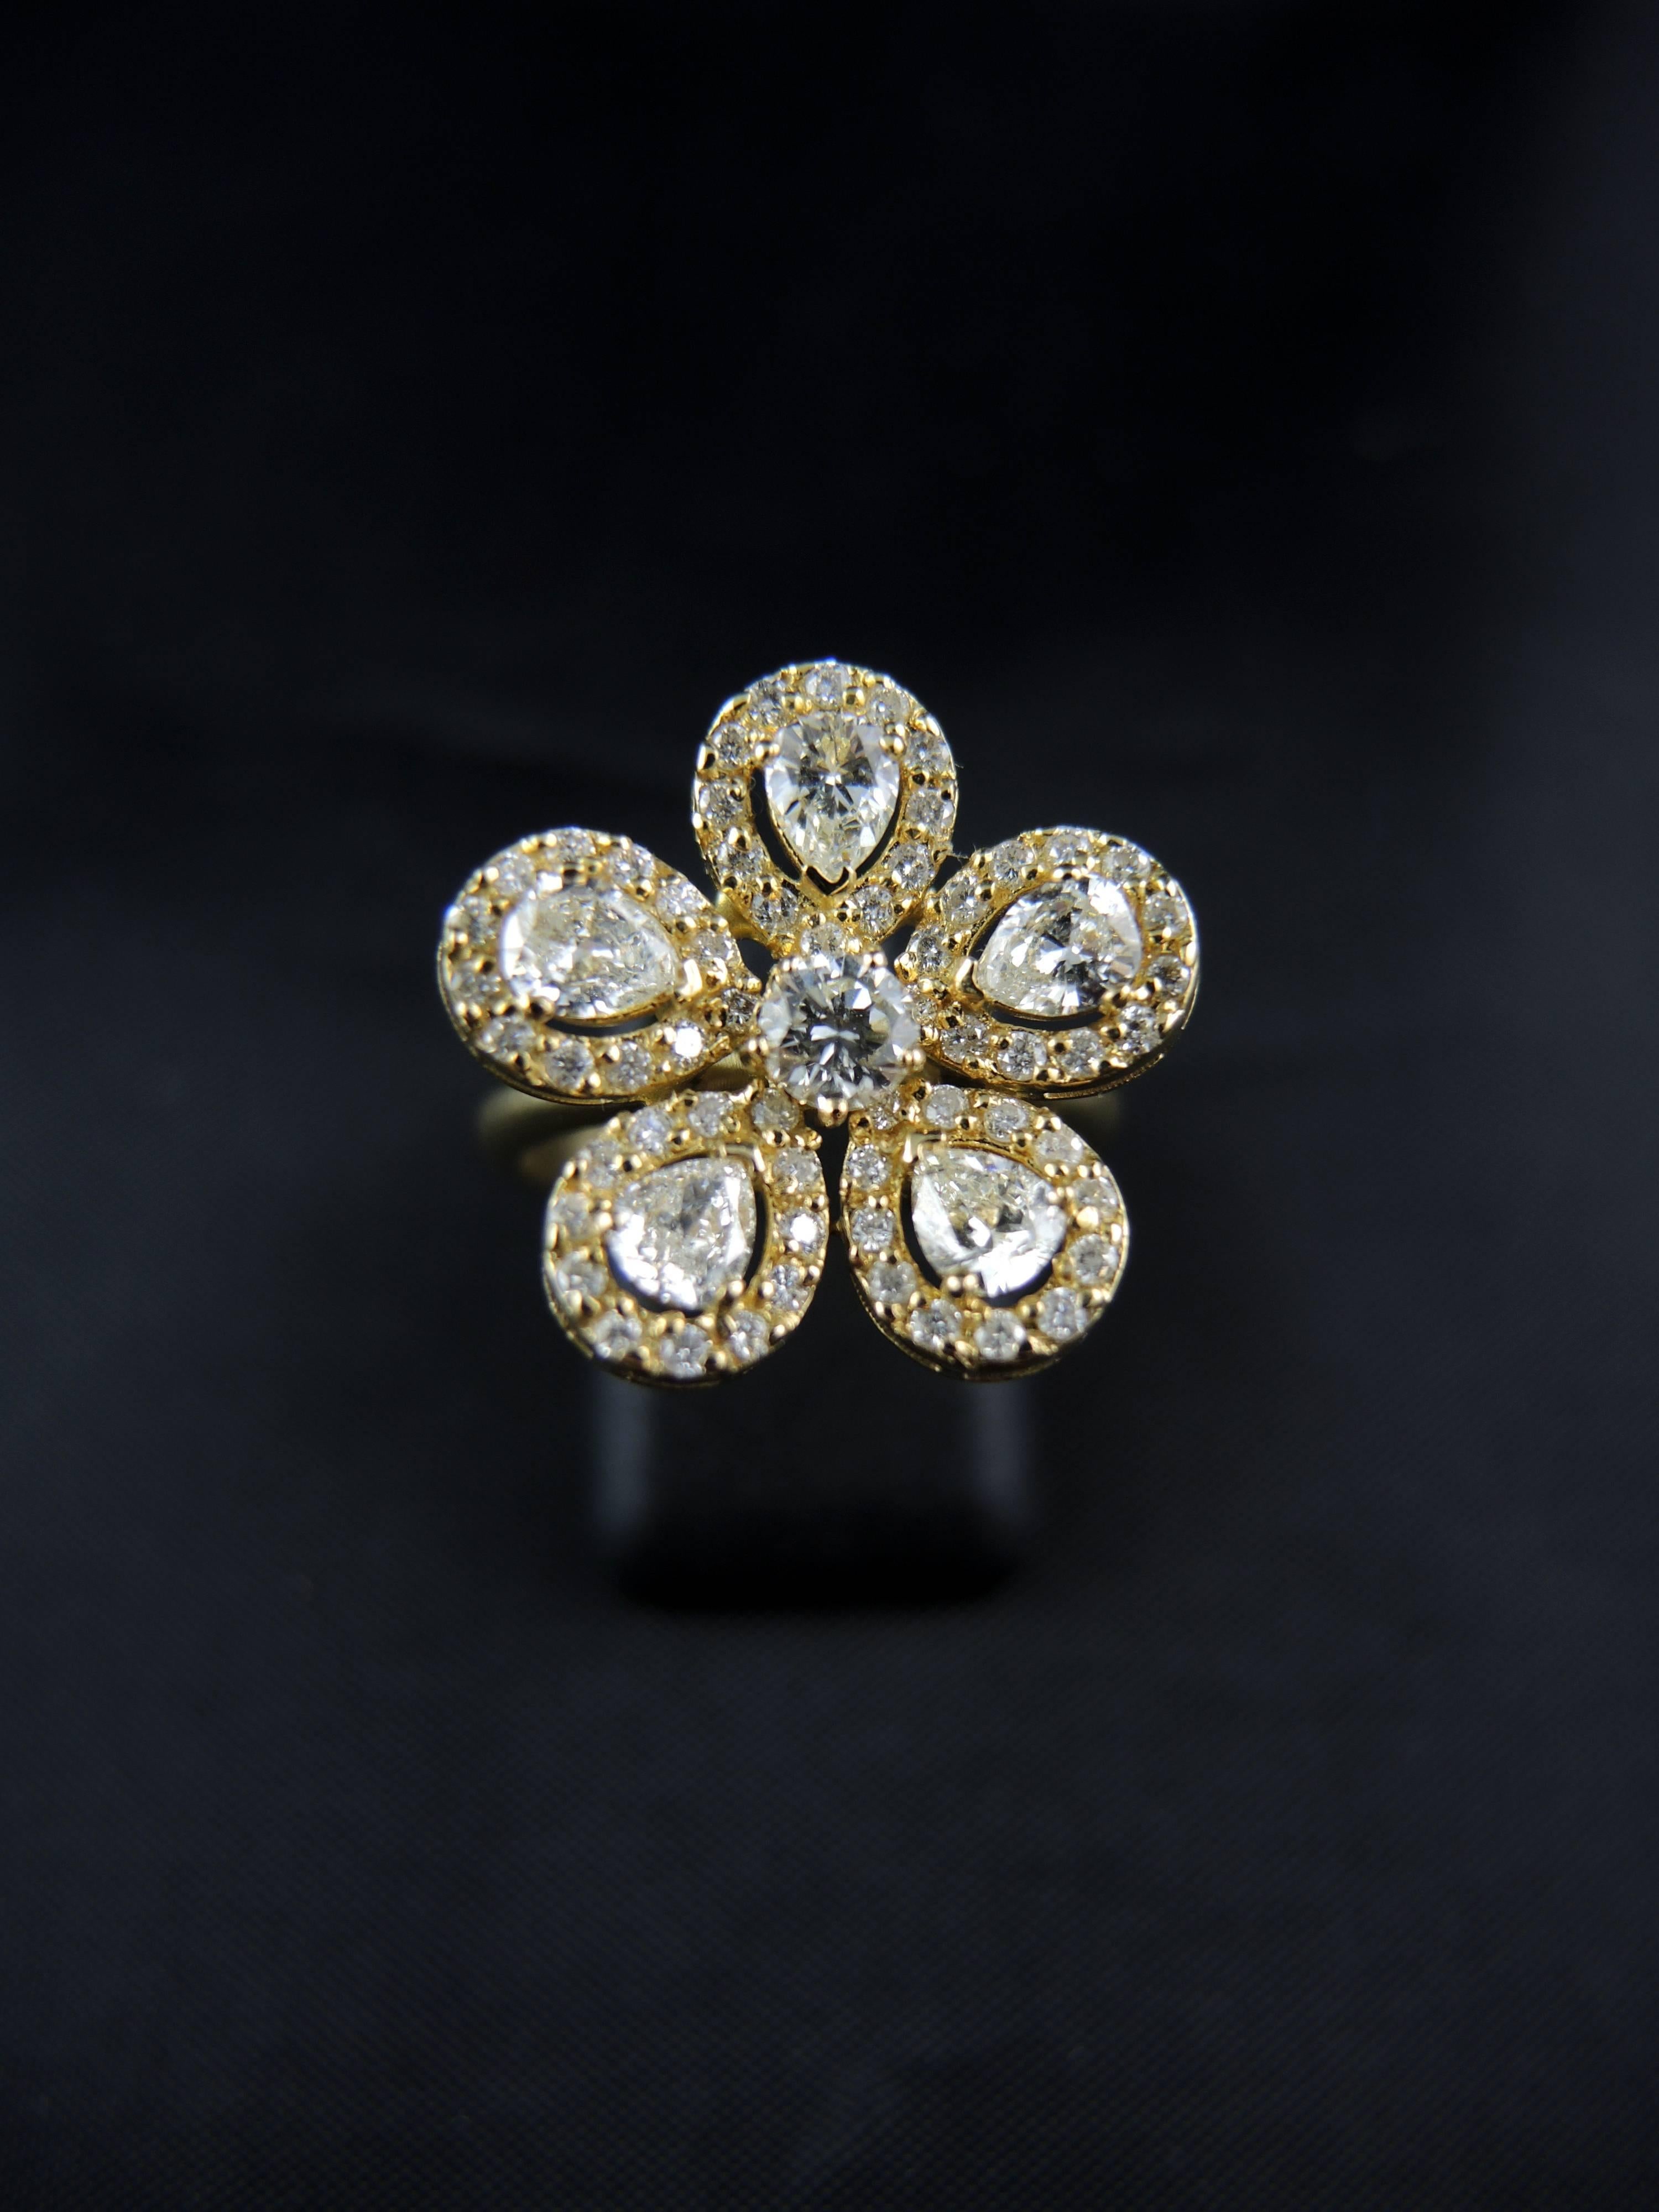 18kt yellow gold "flower" ring (quality mark: eagle's head) set with modern cut and pear shape diamonds, which total weight is estimated around 2,45 cts.  

Circa 2010.  
Weight: 6,10g 

Ring size: 54 (diameter 17,20/ US size 6.80).

Very